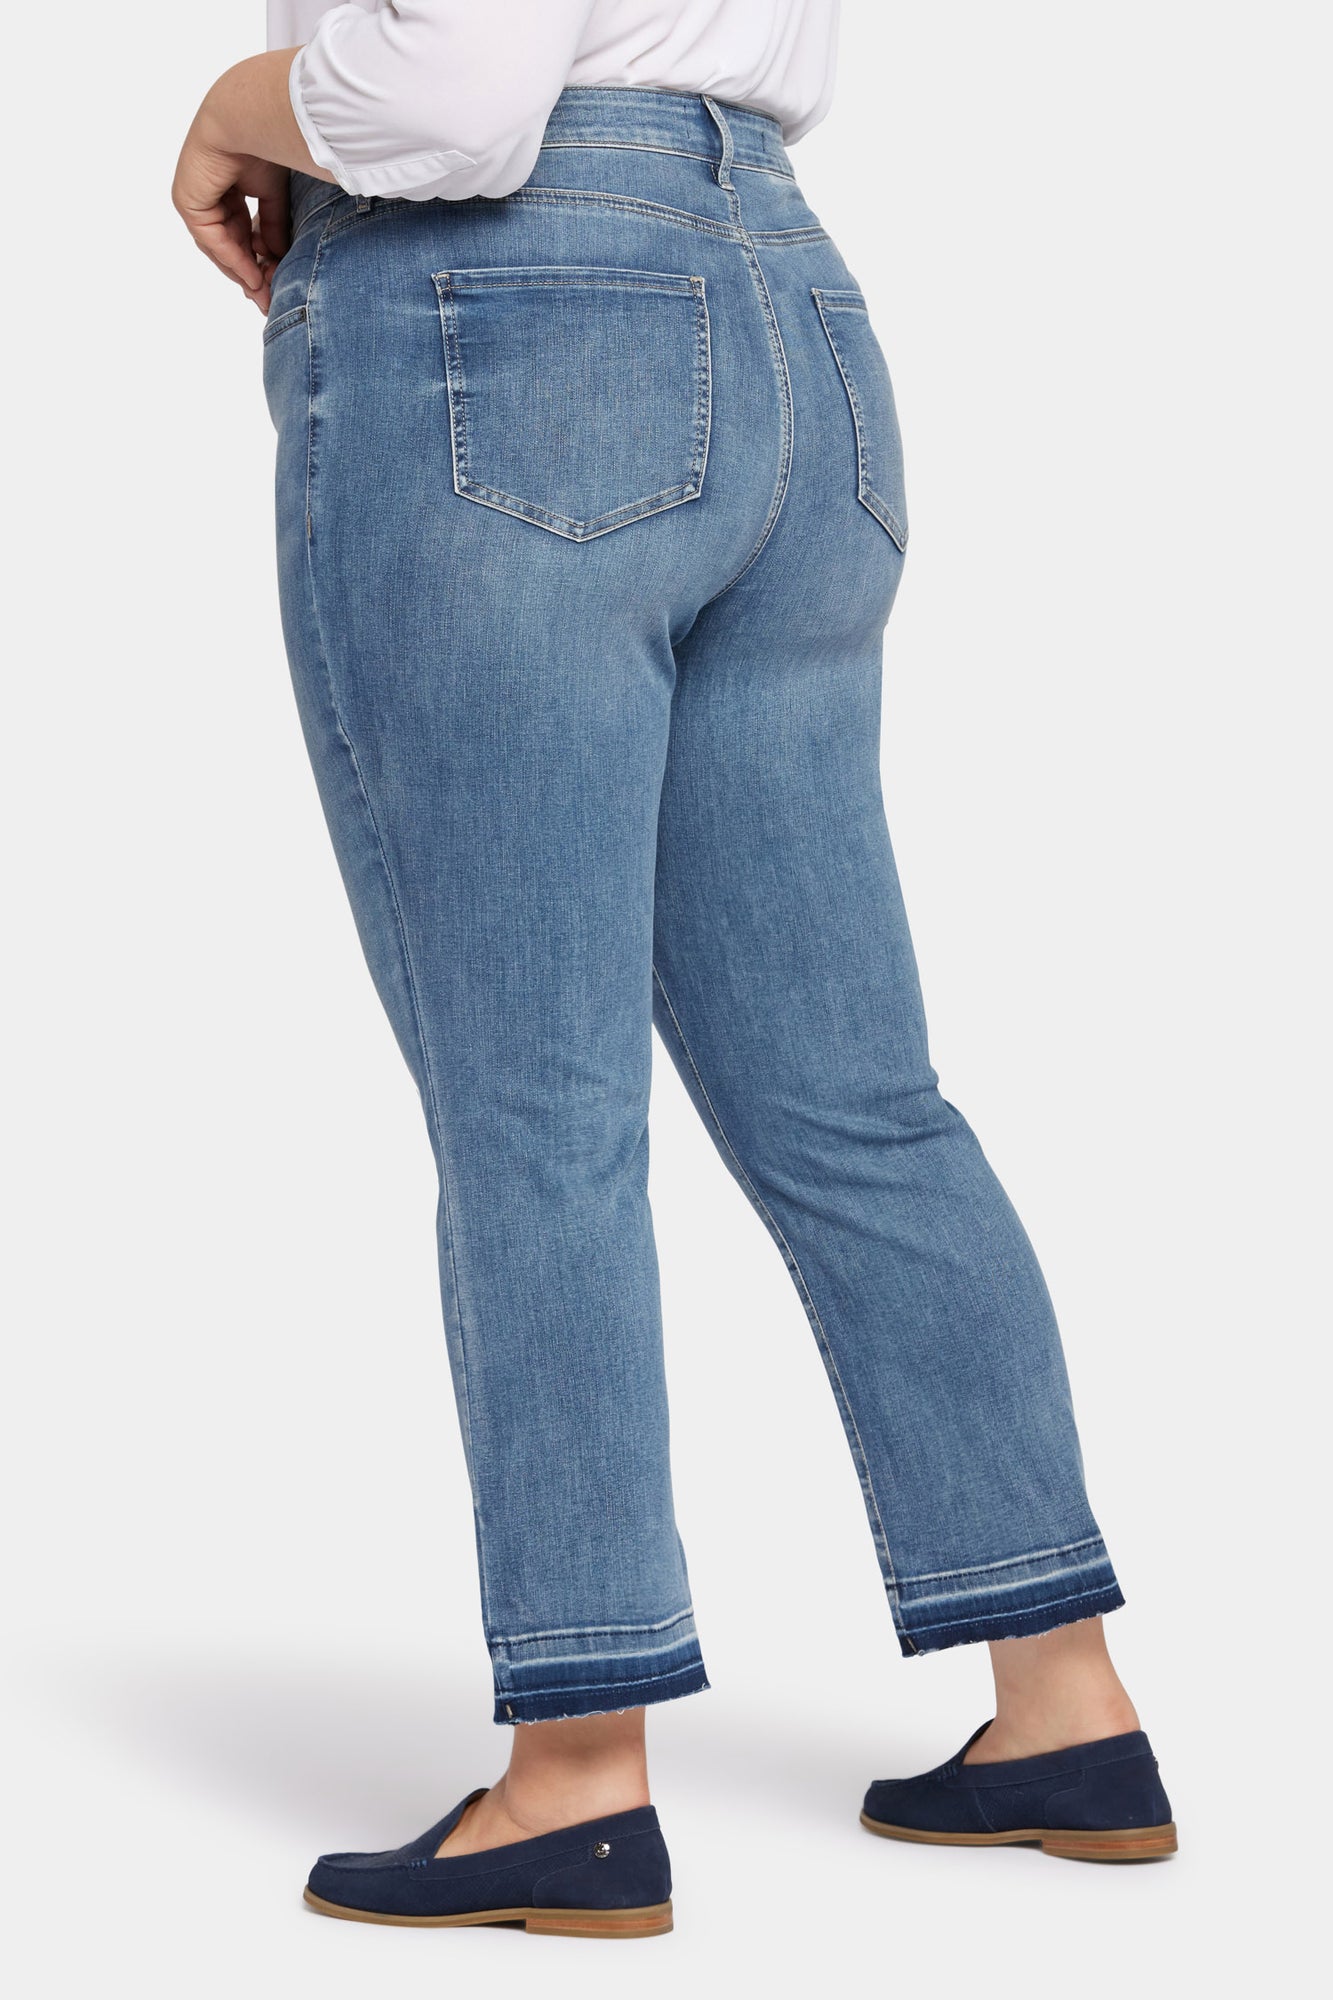 NYDJ Marilyn Straight Ankle Jeans In Plus Size In Cool Embrace® Denim With High Rise And Released Hems - Fantasy